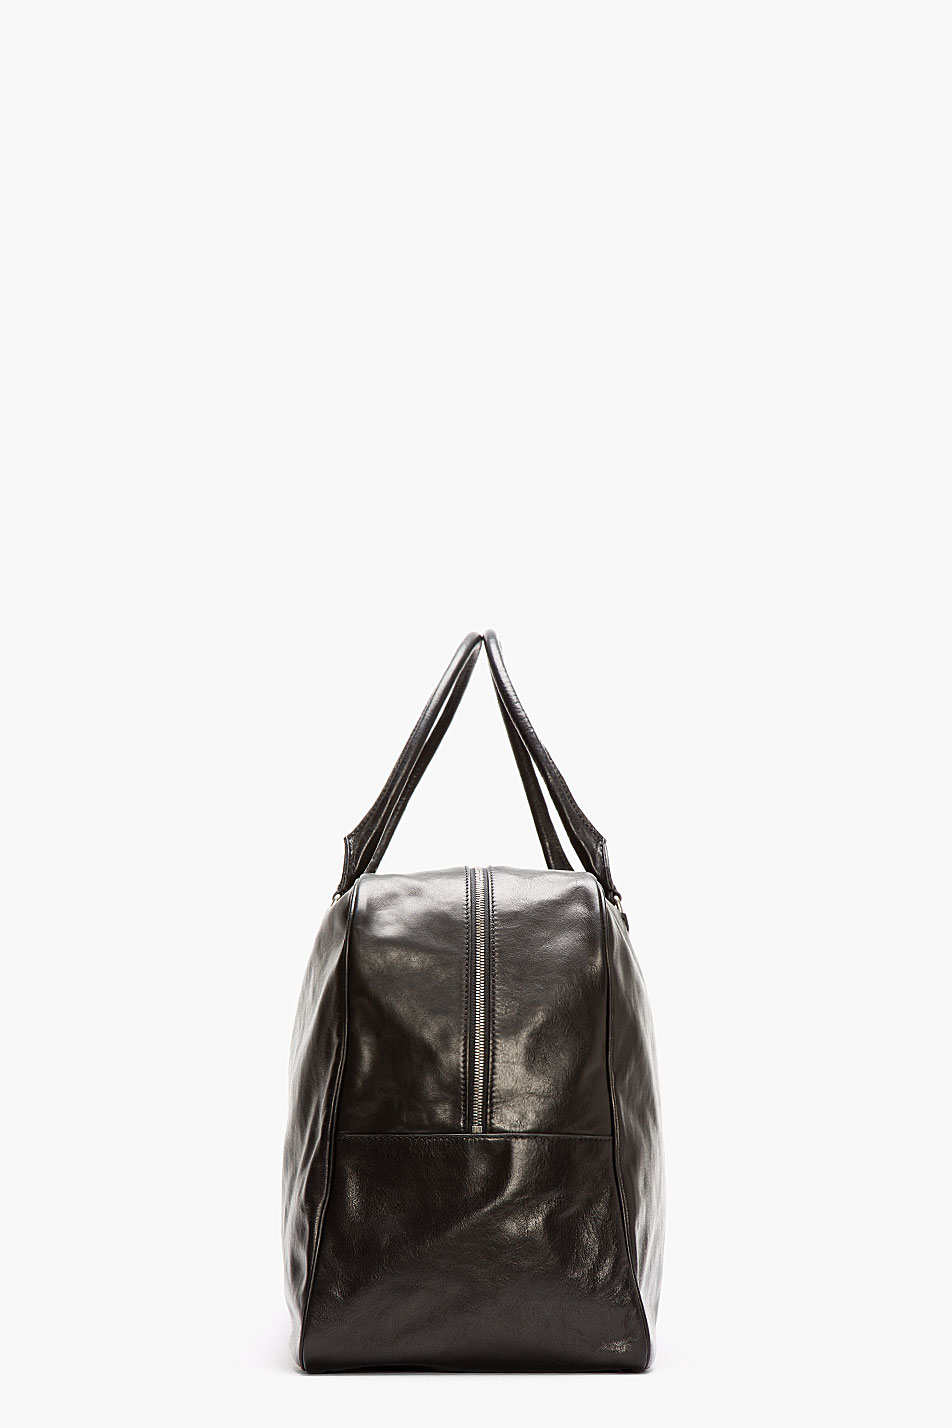 Ann demeulemeester Black Buffed Leather Large Duffle Bag in Black for ...